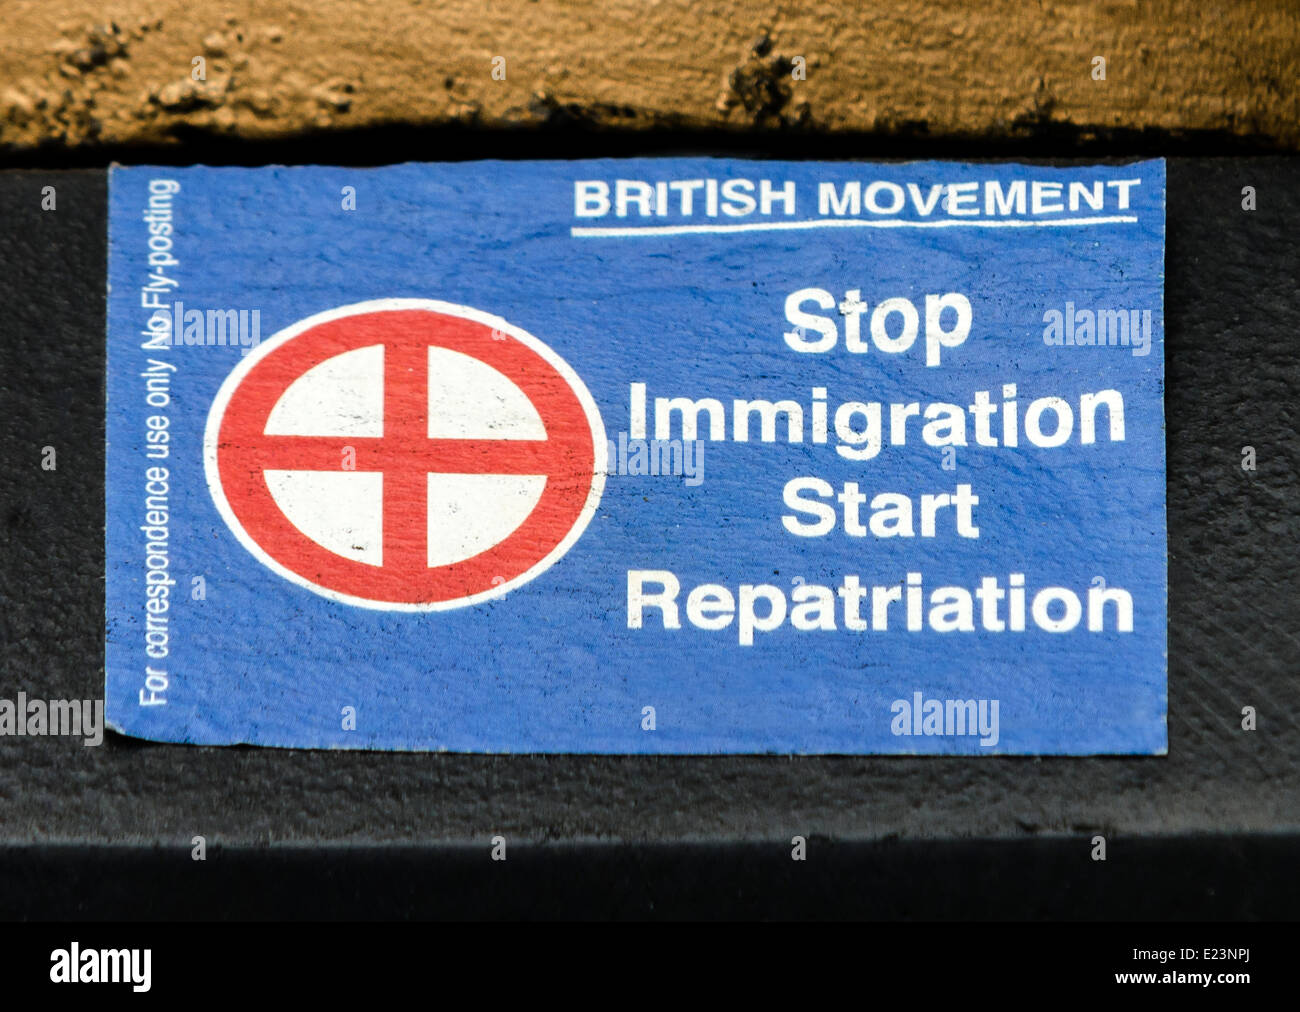 British Movement - UK far right group repatriation street sticker seen in Westminster, London Stock Photo